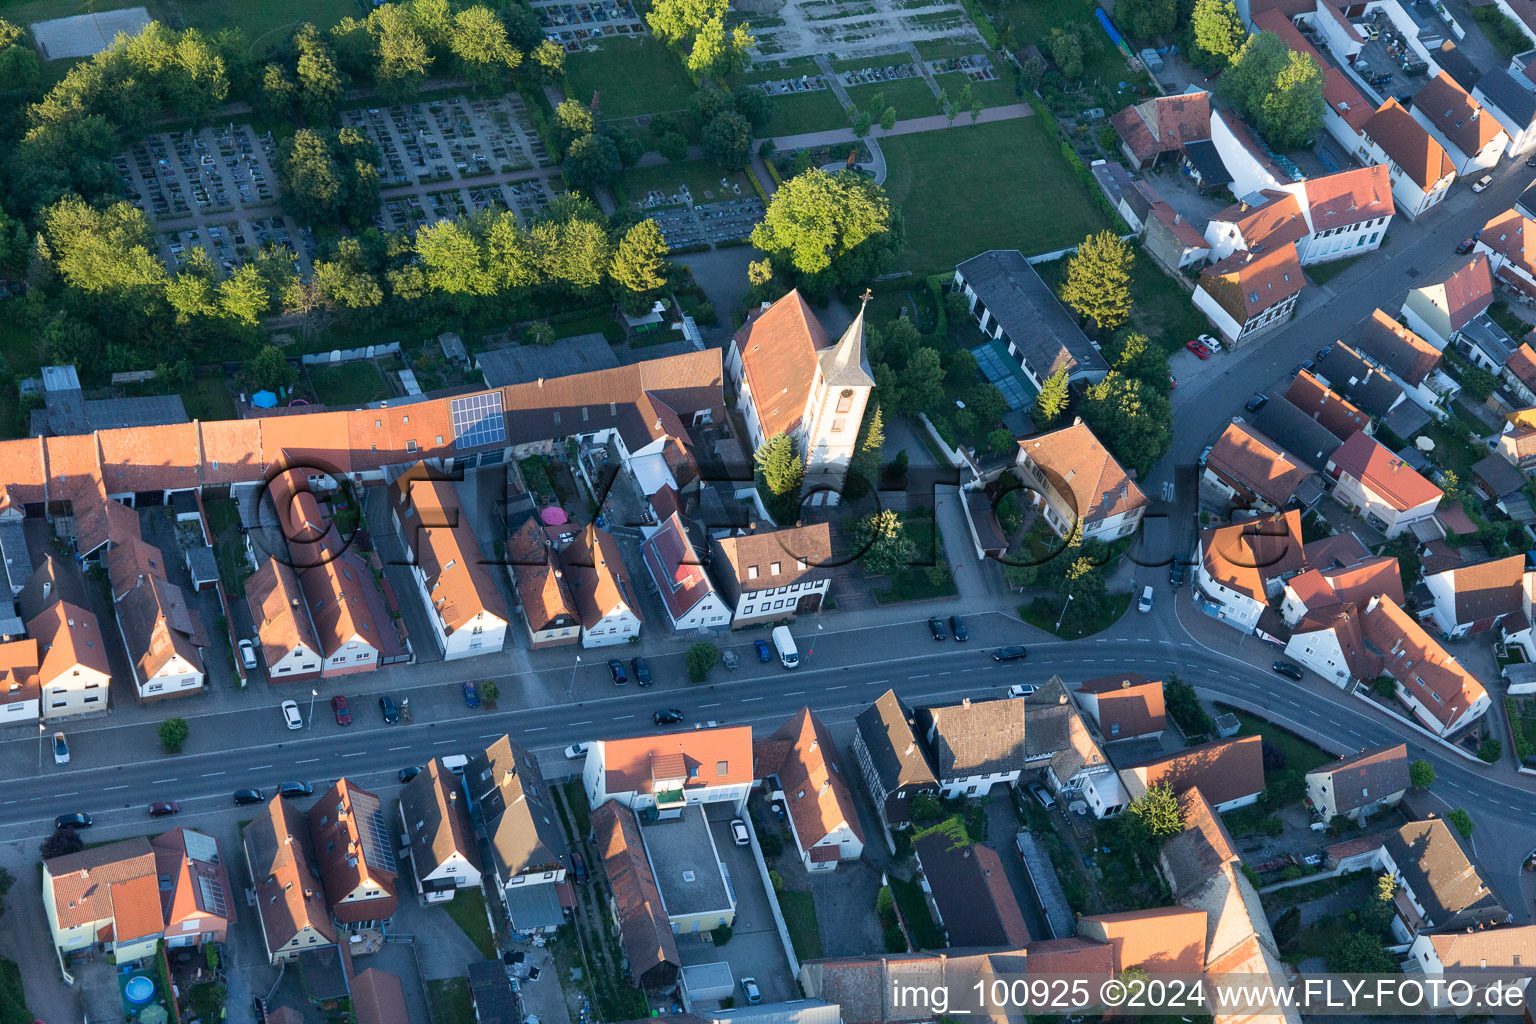 Dettenheim in the state Baden-Wuerttemberg, Germany seen from a drone